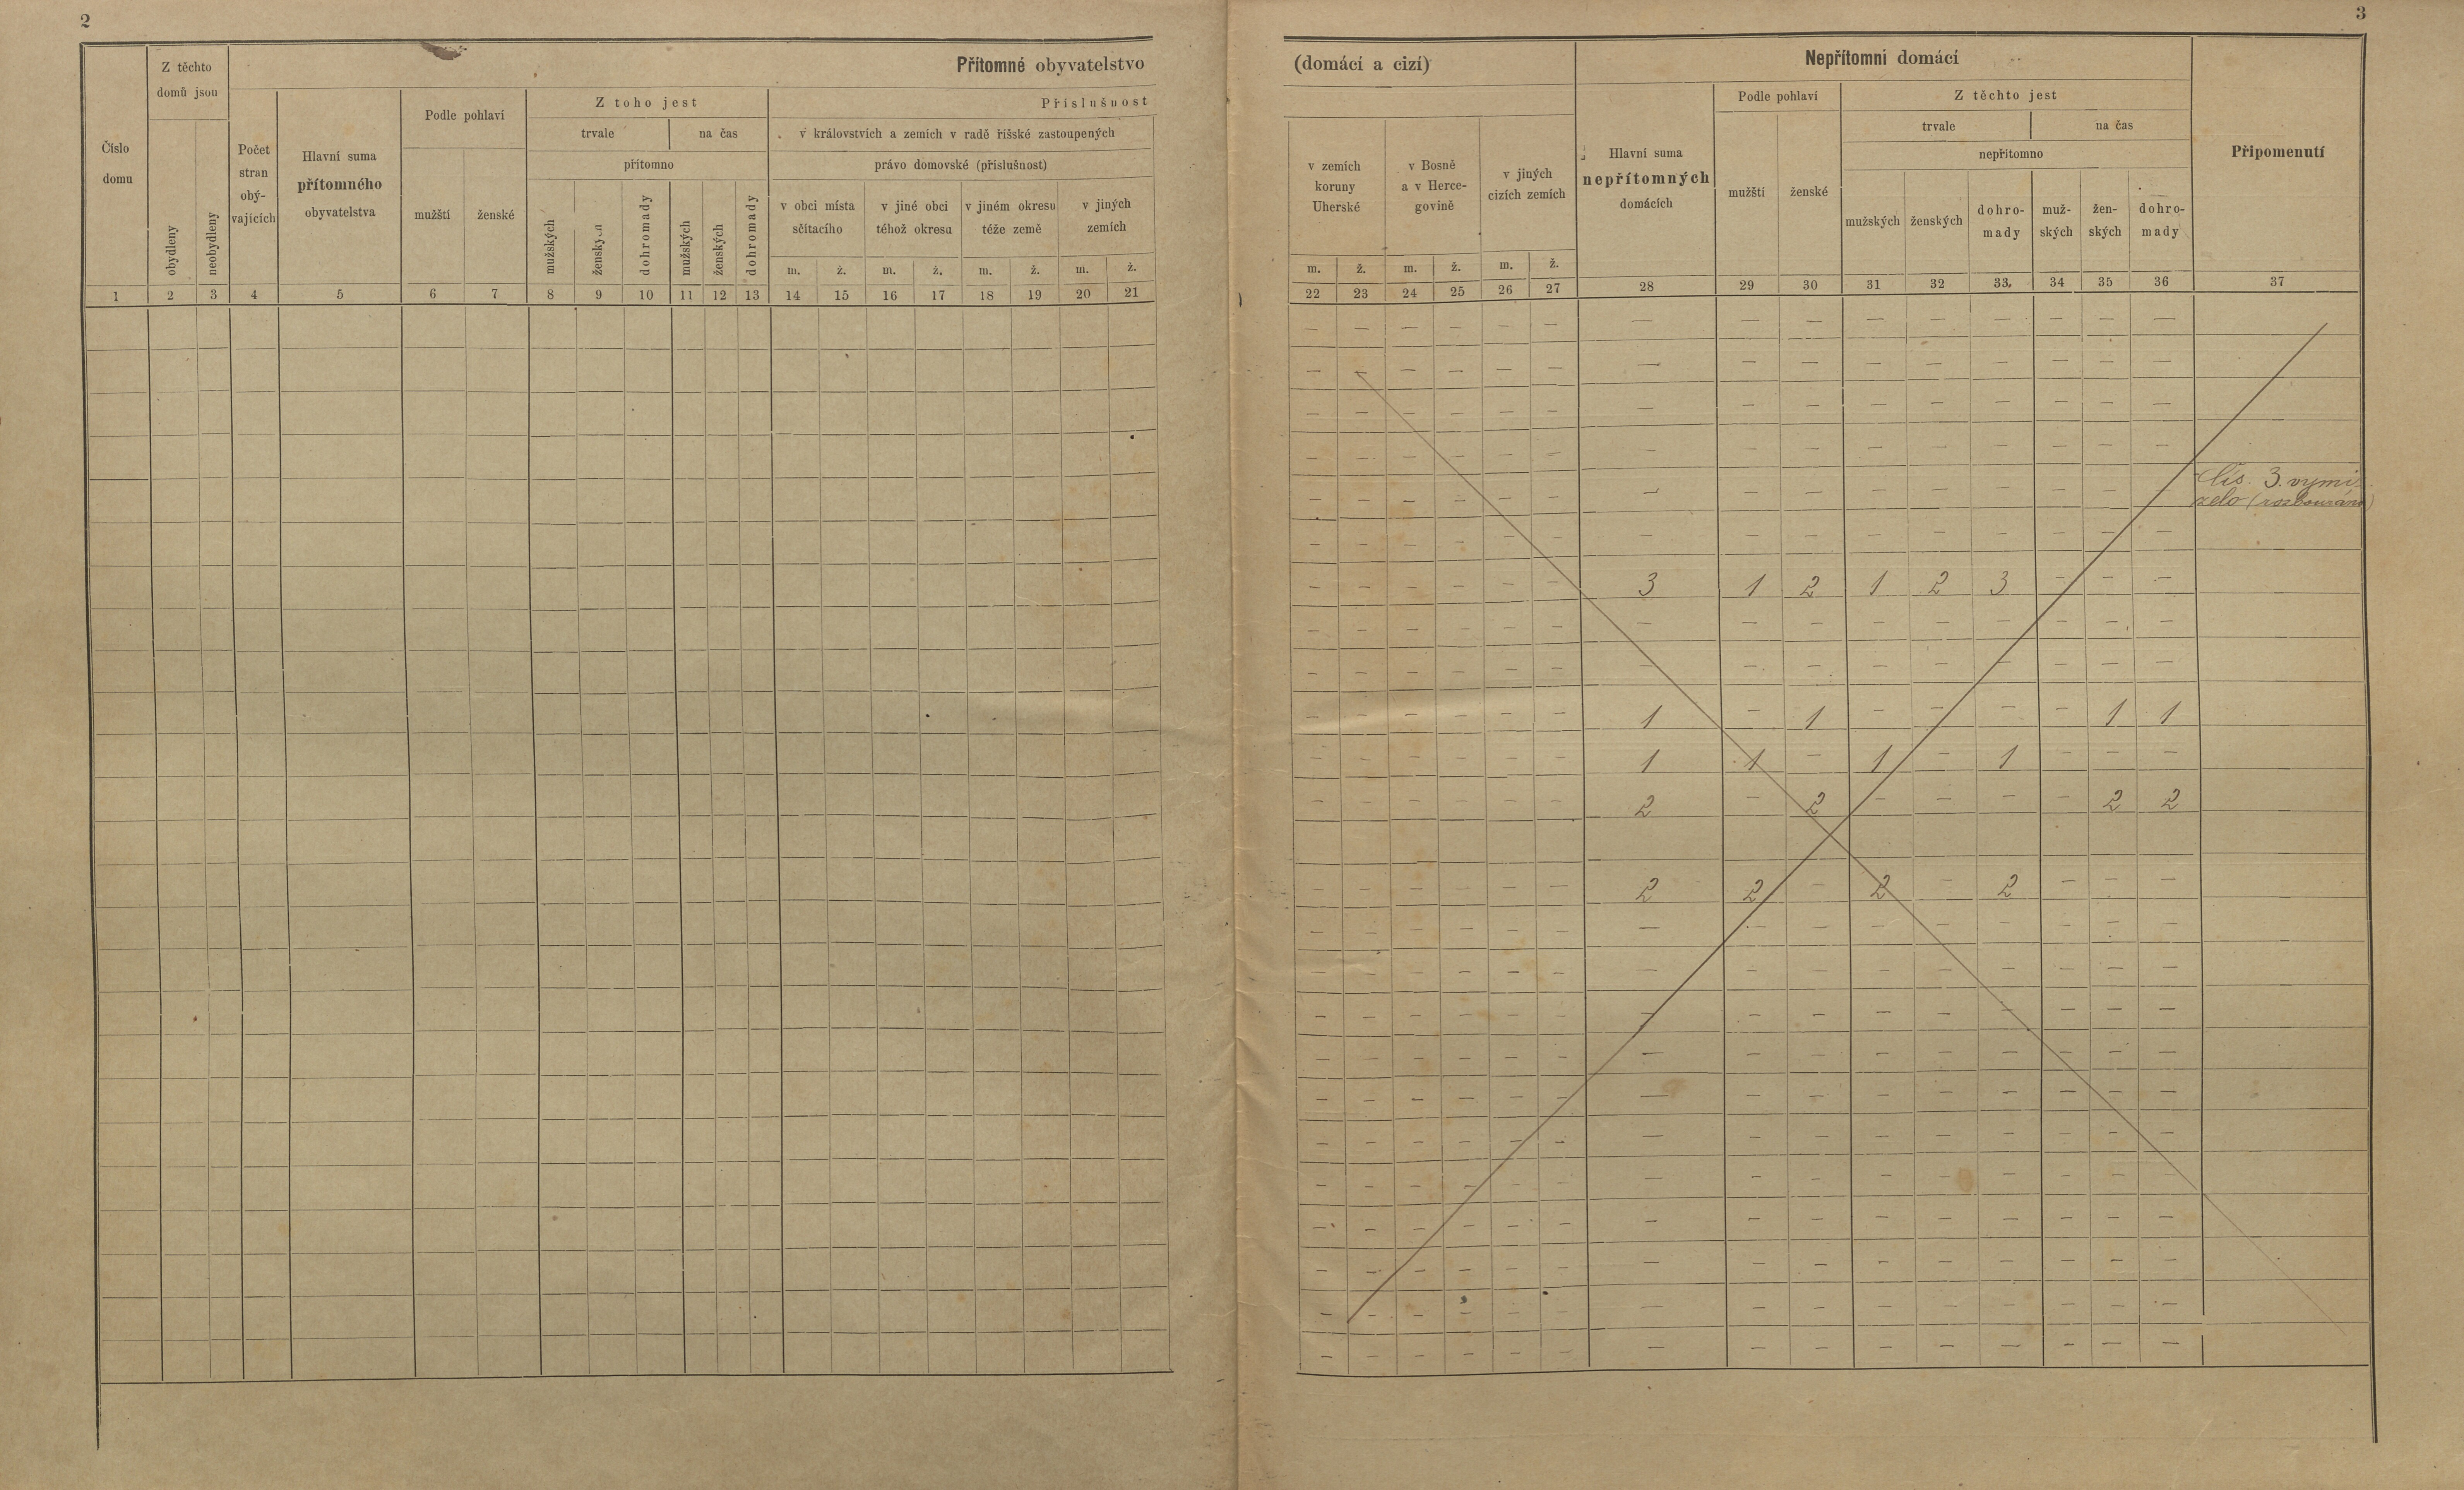 6. soap-kt_01159_census-sum-1900-obytce_0060